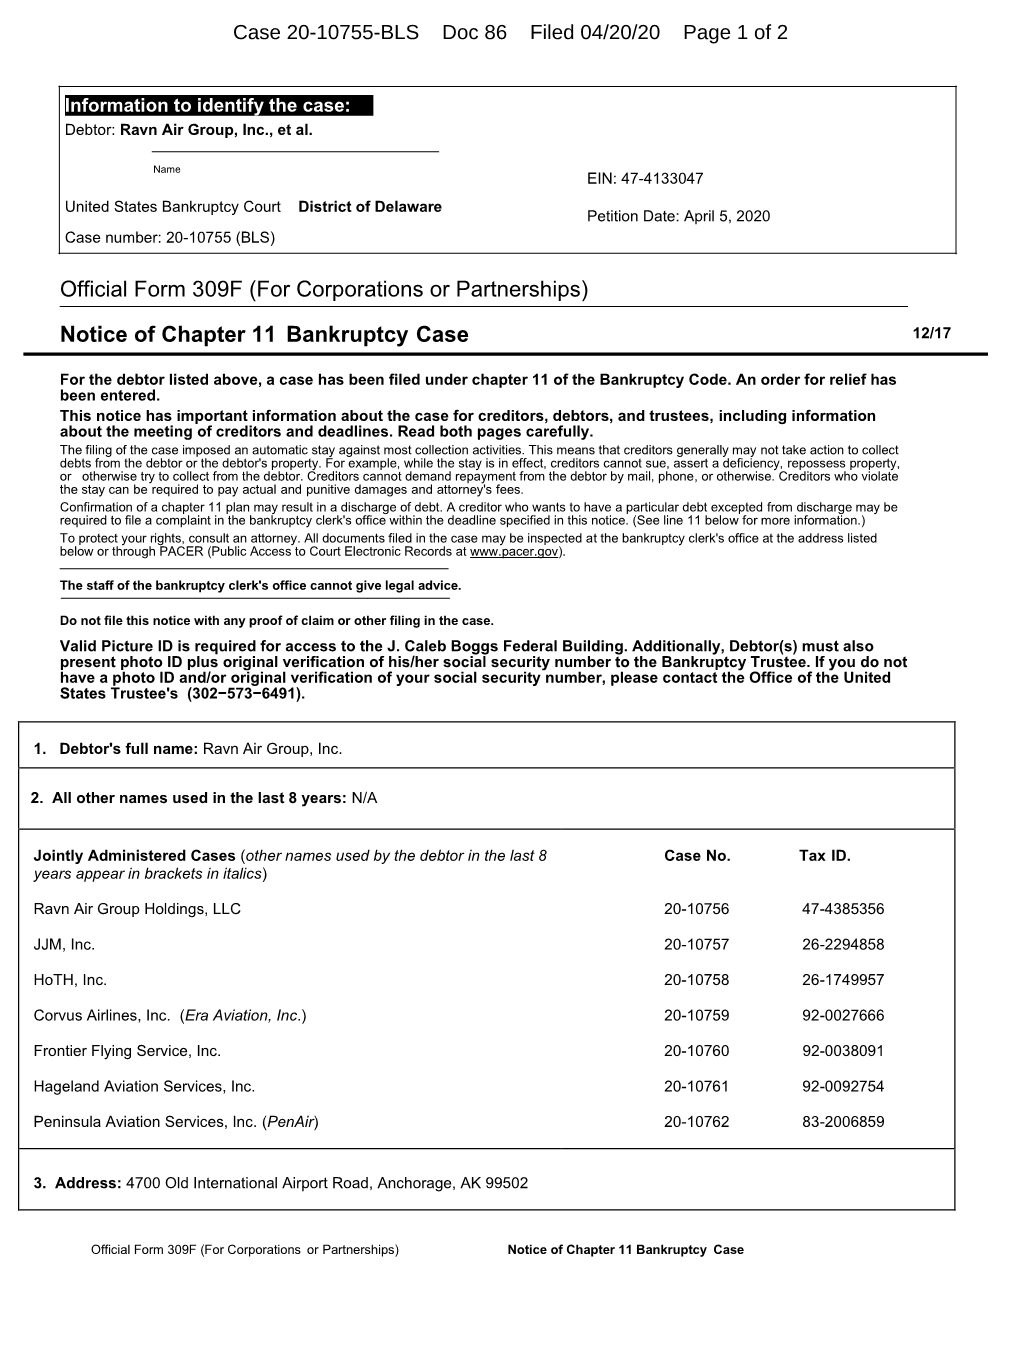 Official Form 309F (For Corporations Or Partnerships) Notice of Chapter 11 Bankruptcy Case